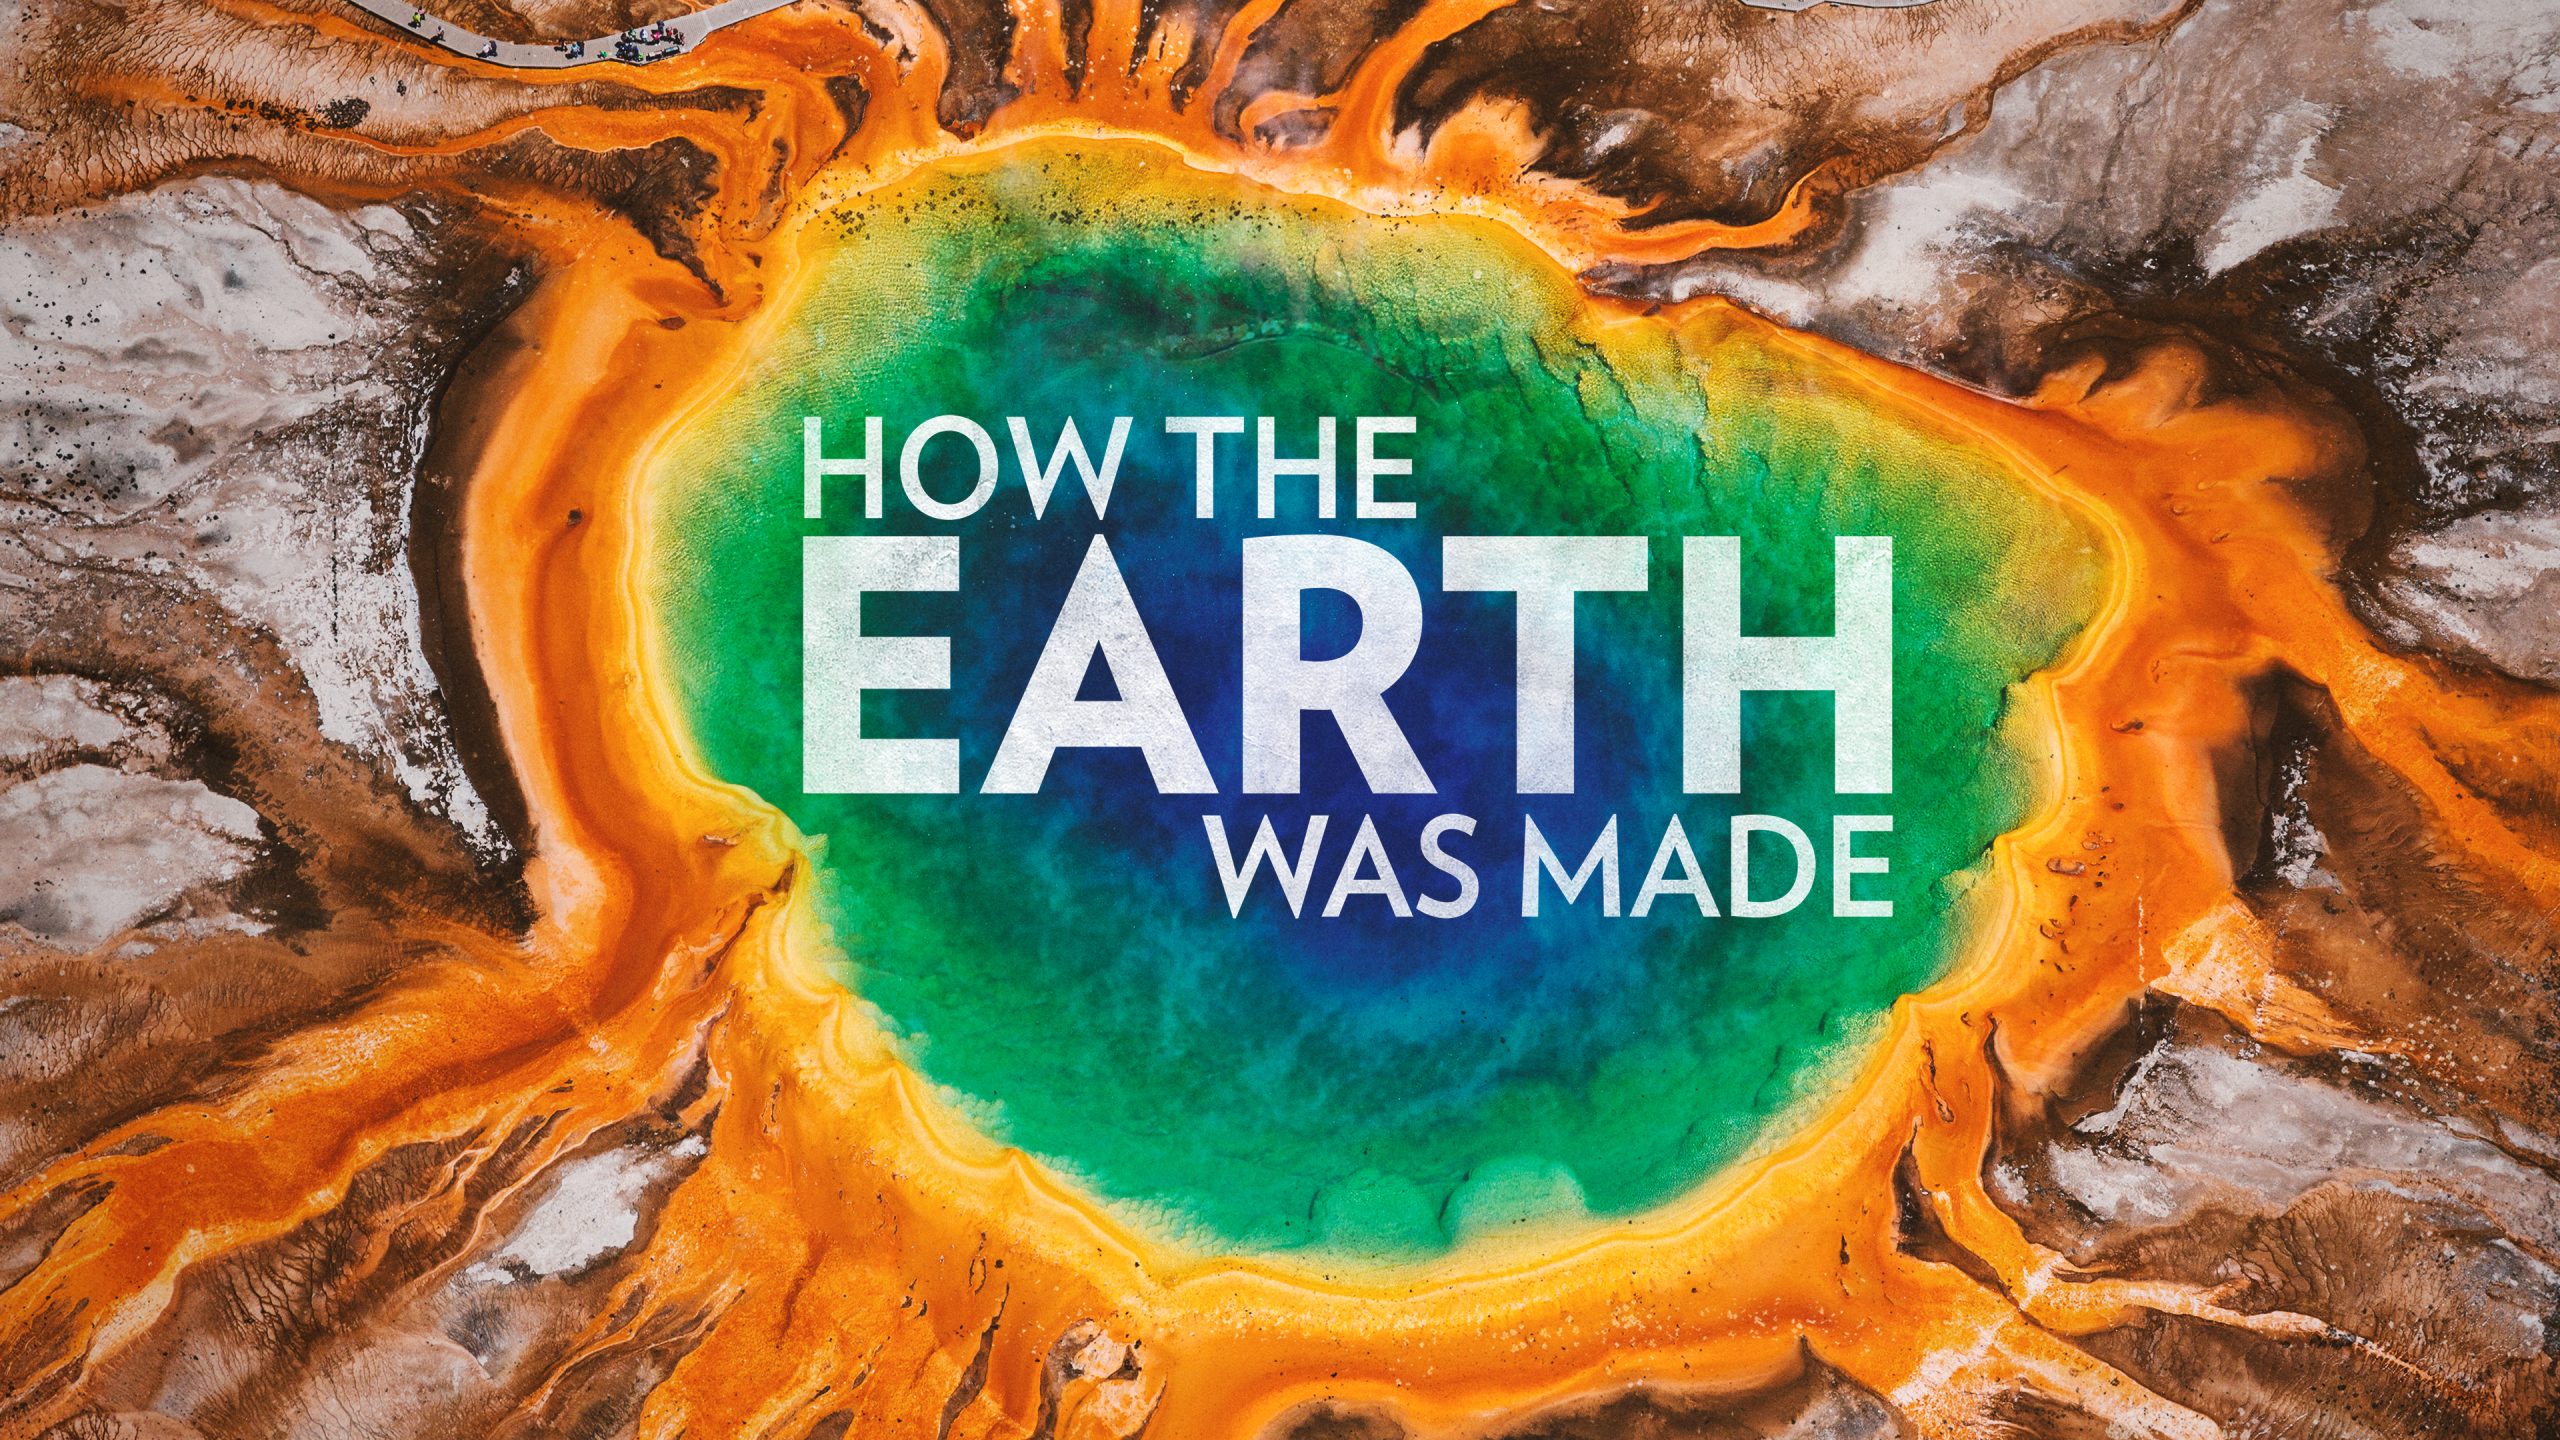 Watch 'How the Earth Was Made' on HISTORY Vault